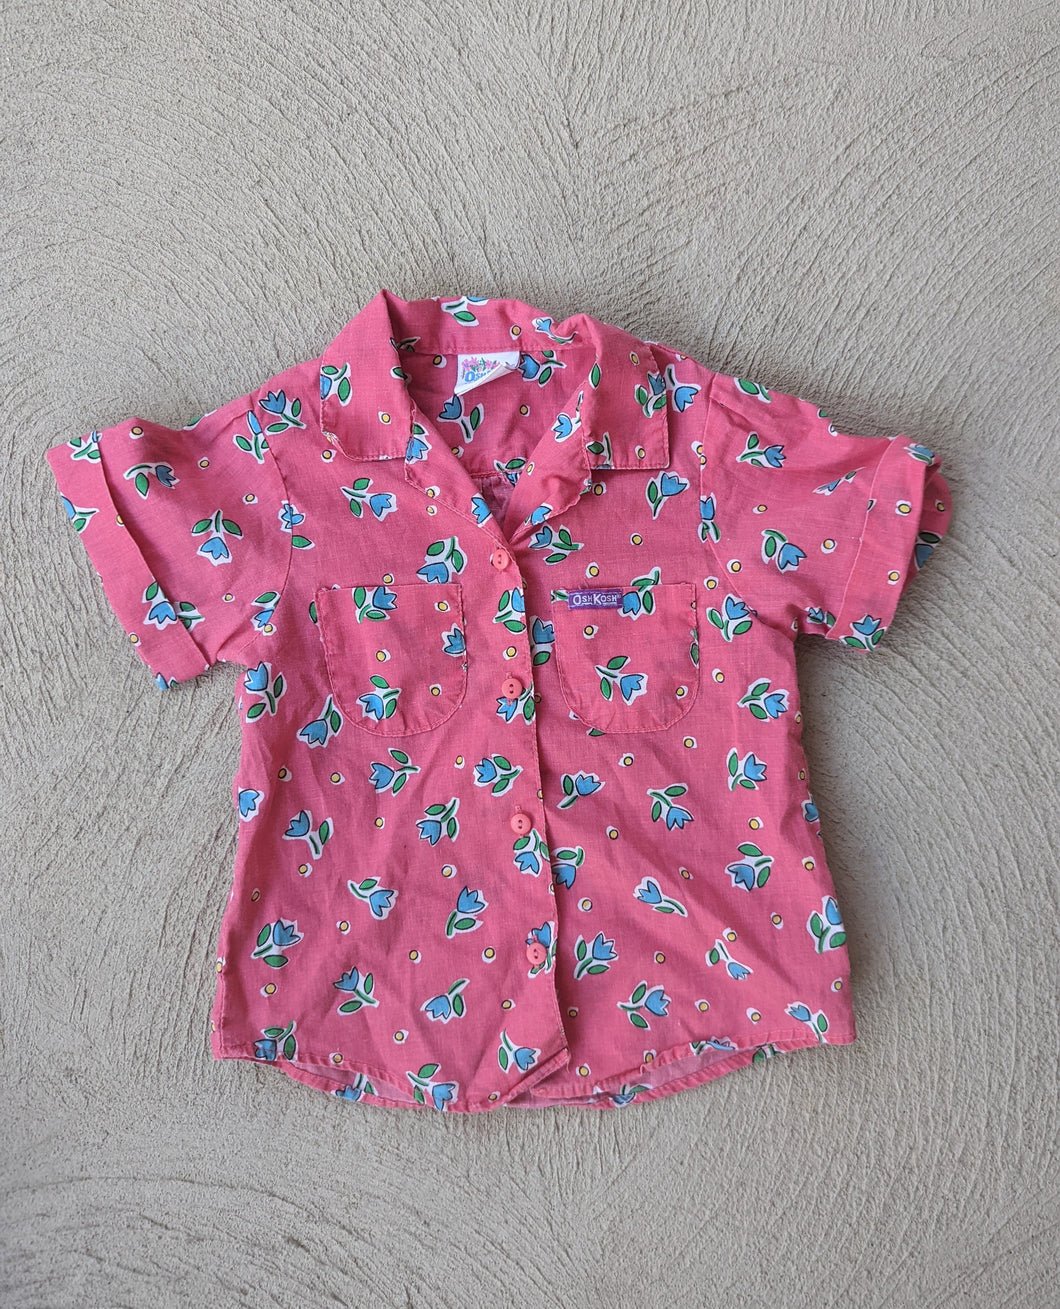 Oshkosh Pink Floral Button up Top 4t